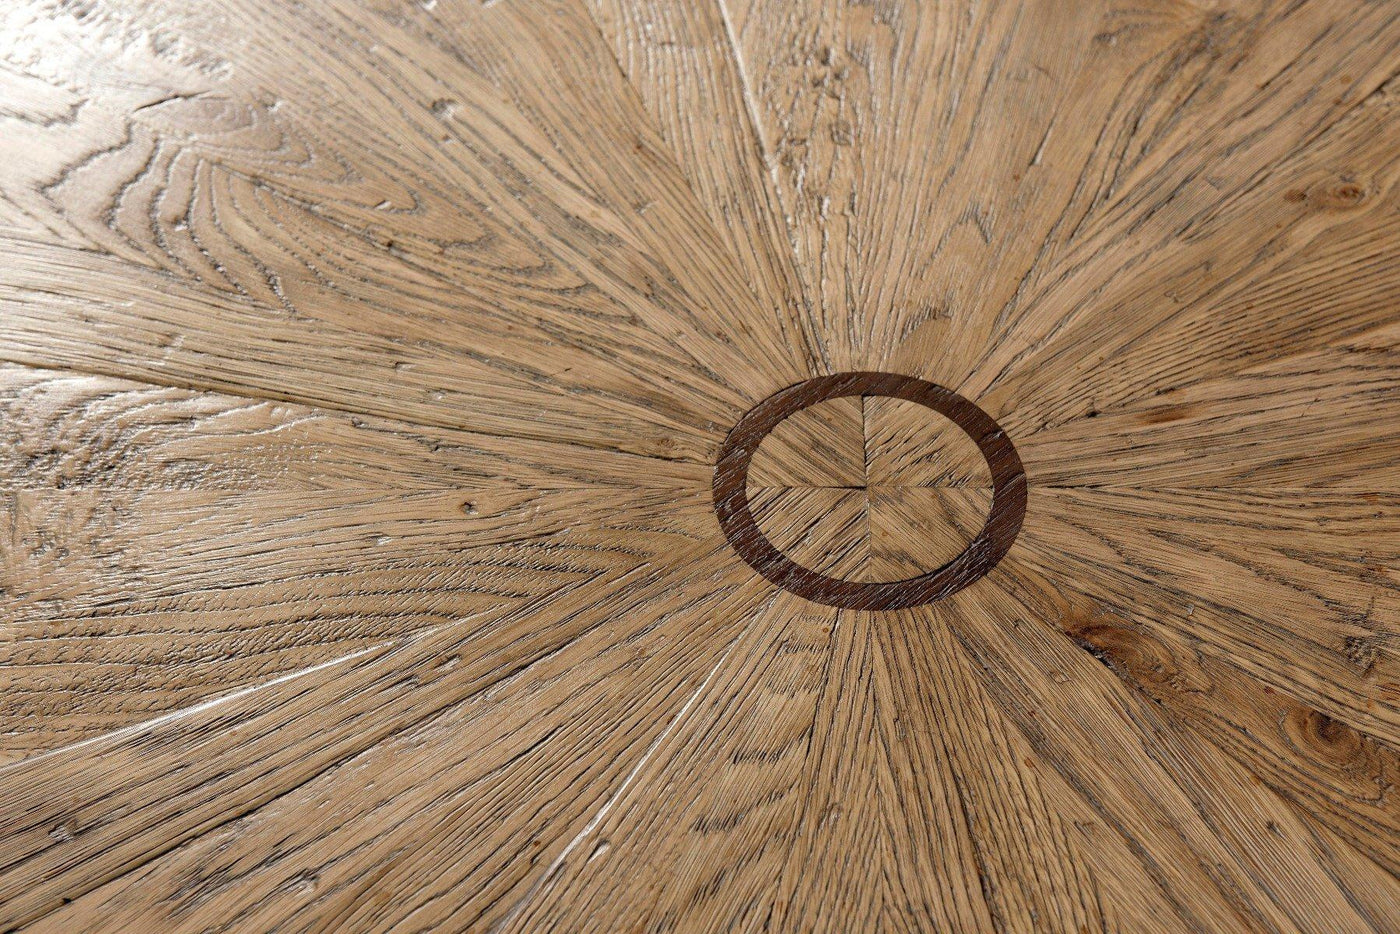 Theodore Alexander Living Round Coffee Table Weston in Echo Oak House of Isabella UK